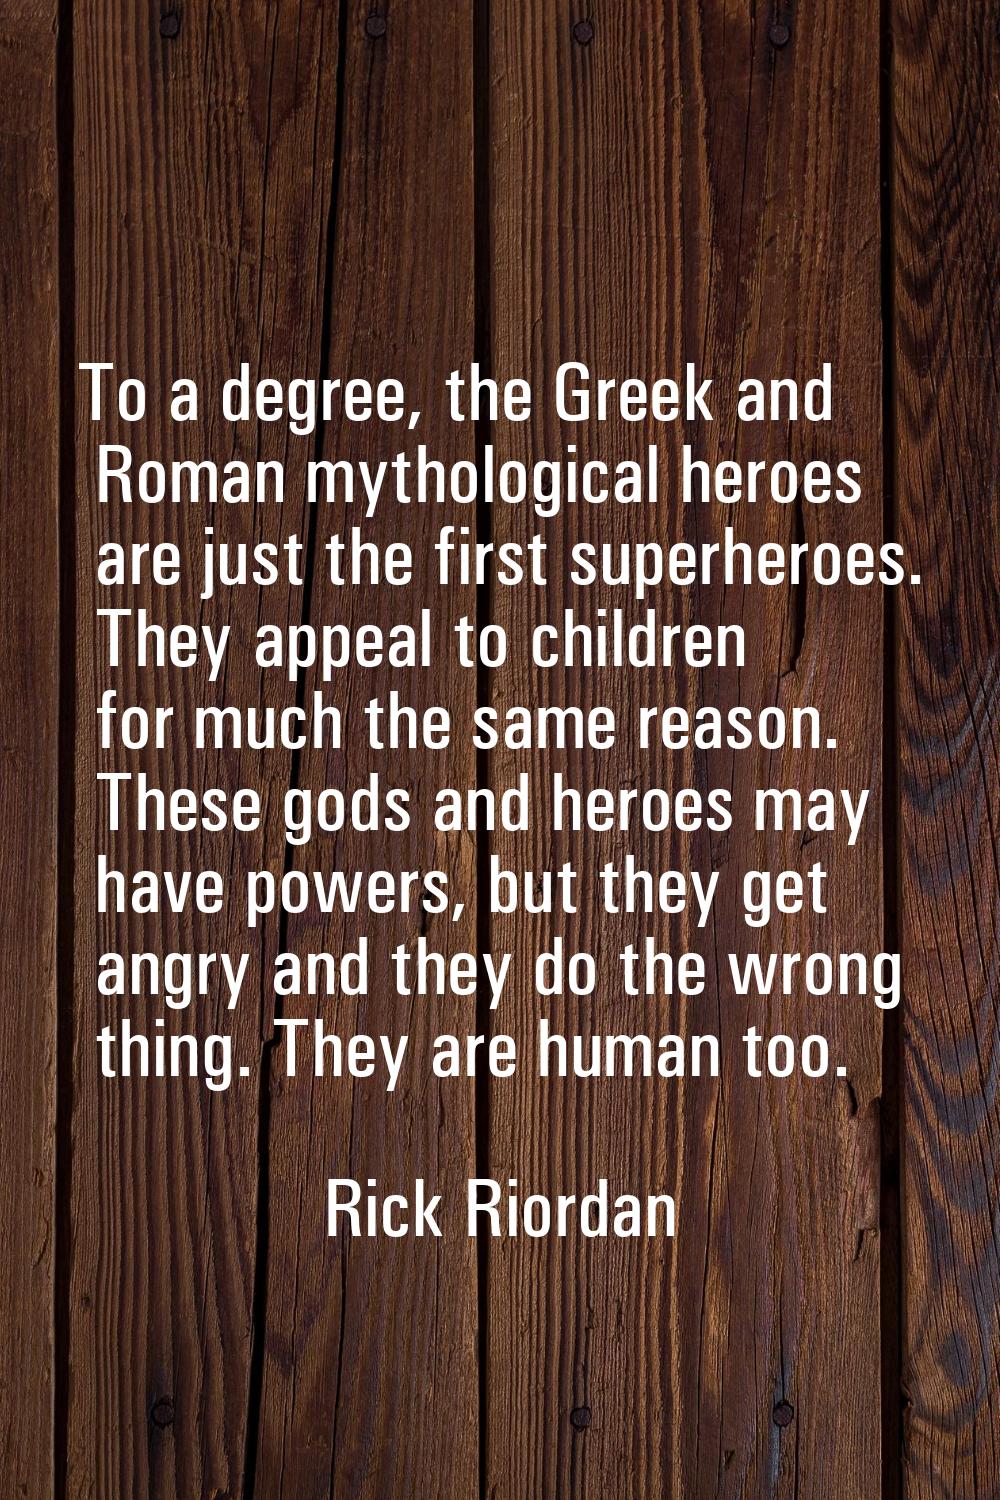 To a degree, the Greek and Roman mythological heroes are just the first superheroes. They appeal to